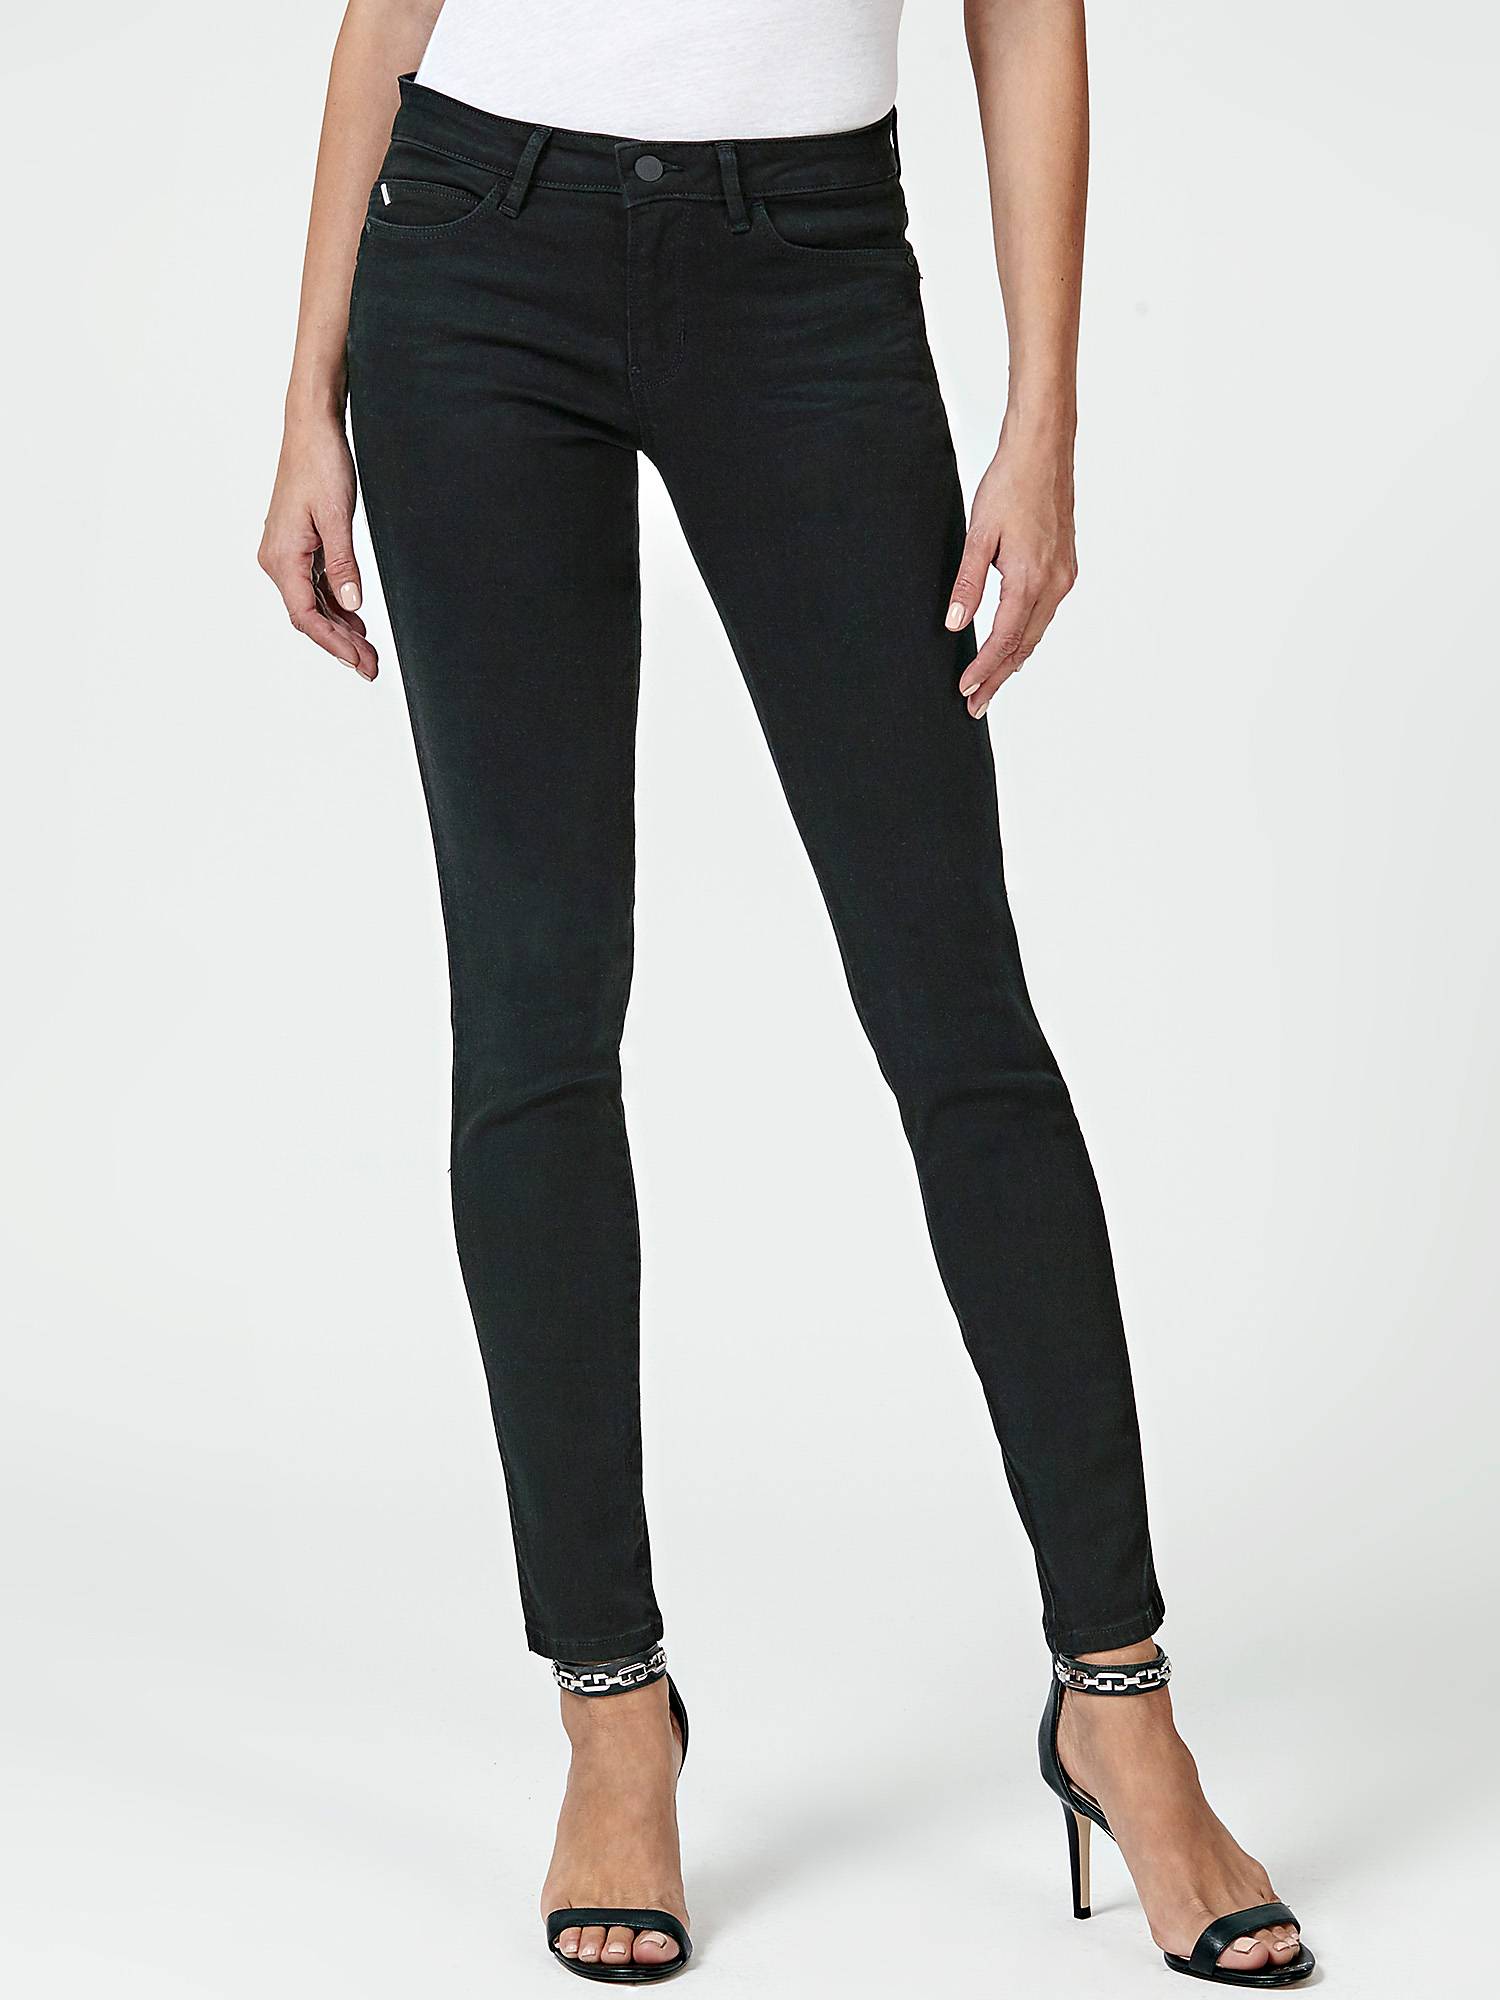 Jeans skinny neri Guess a 79,90 euro